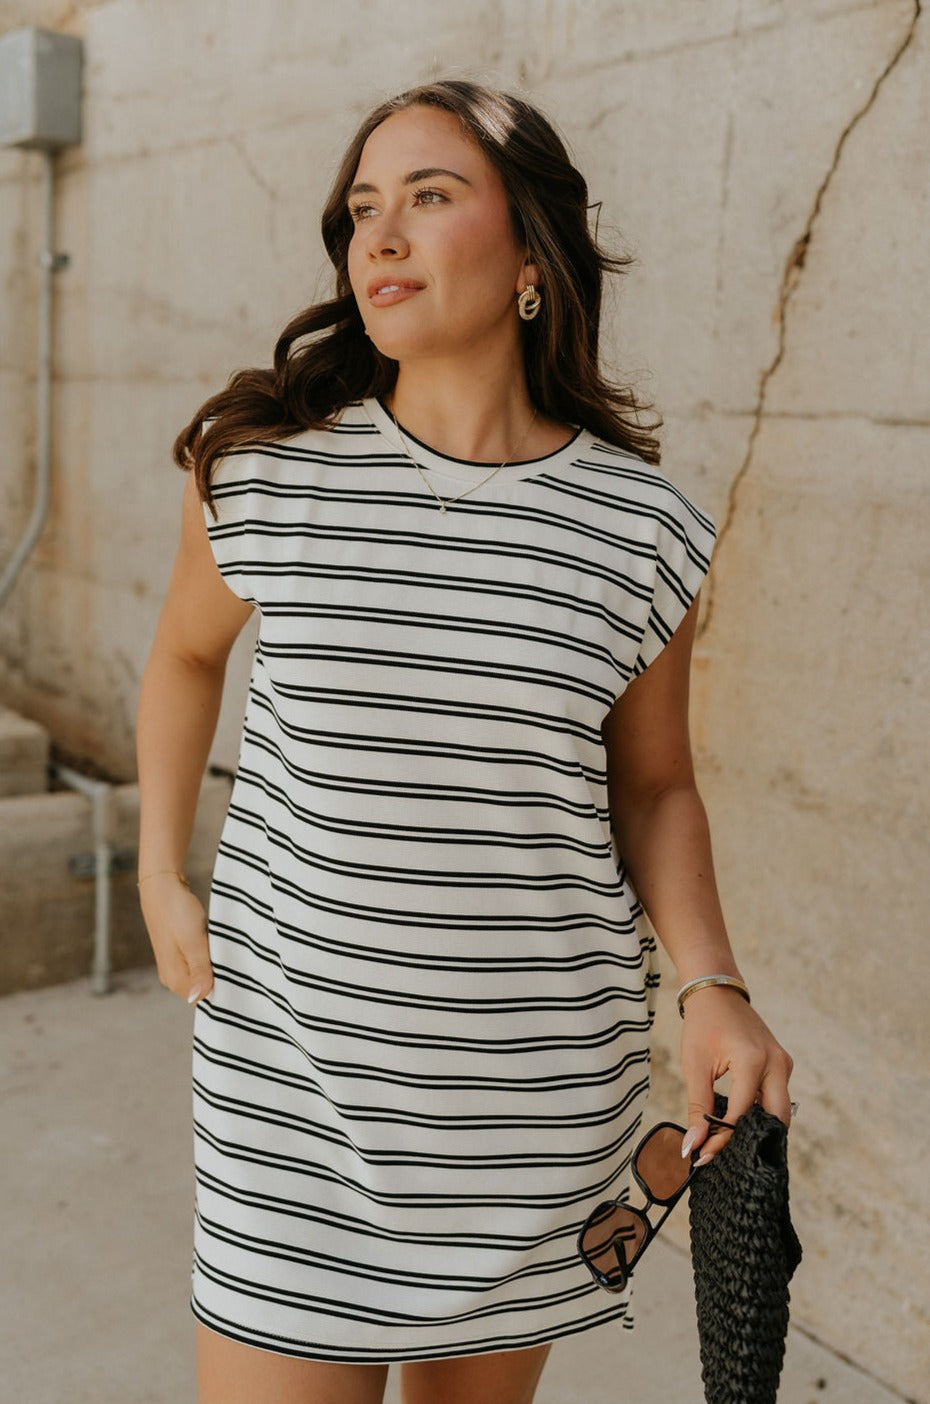 Upper body front view of model wearing the Gabriella Cream & Black Striped Mini Dress that has cream fabric with horizontal black stripes, a sleeveless body, round neck, and side pockets.